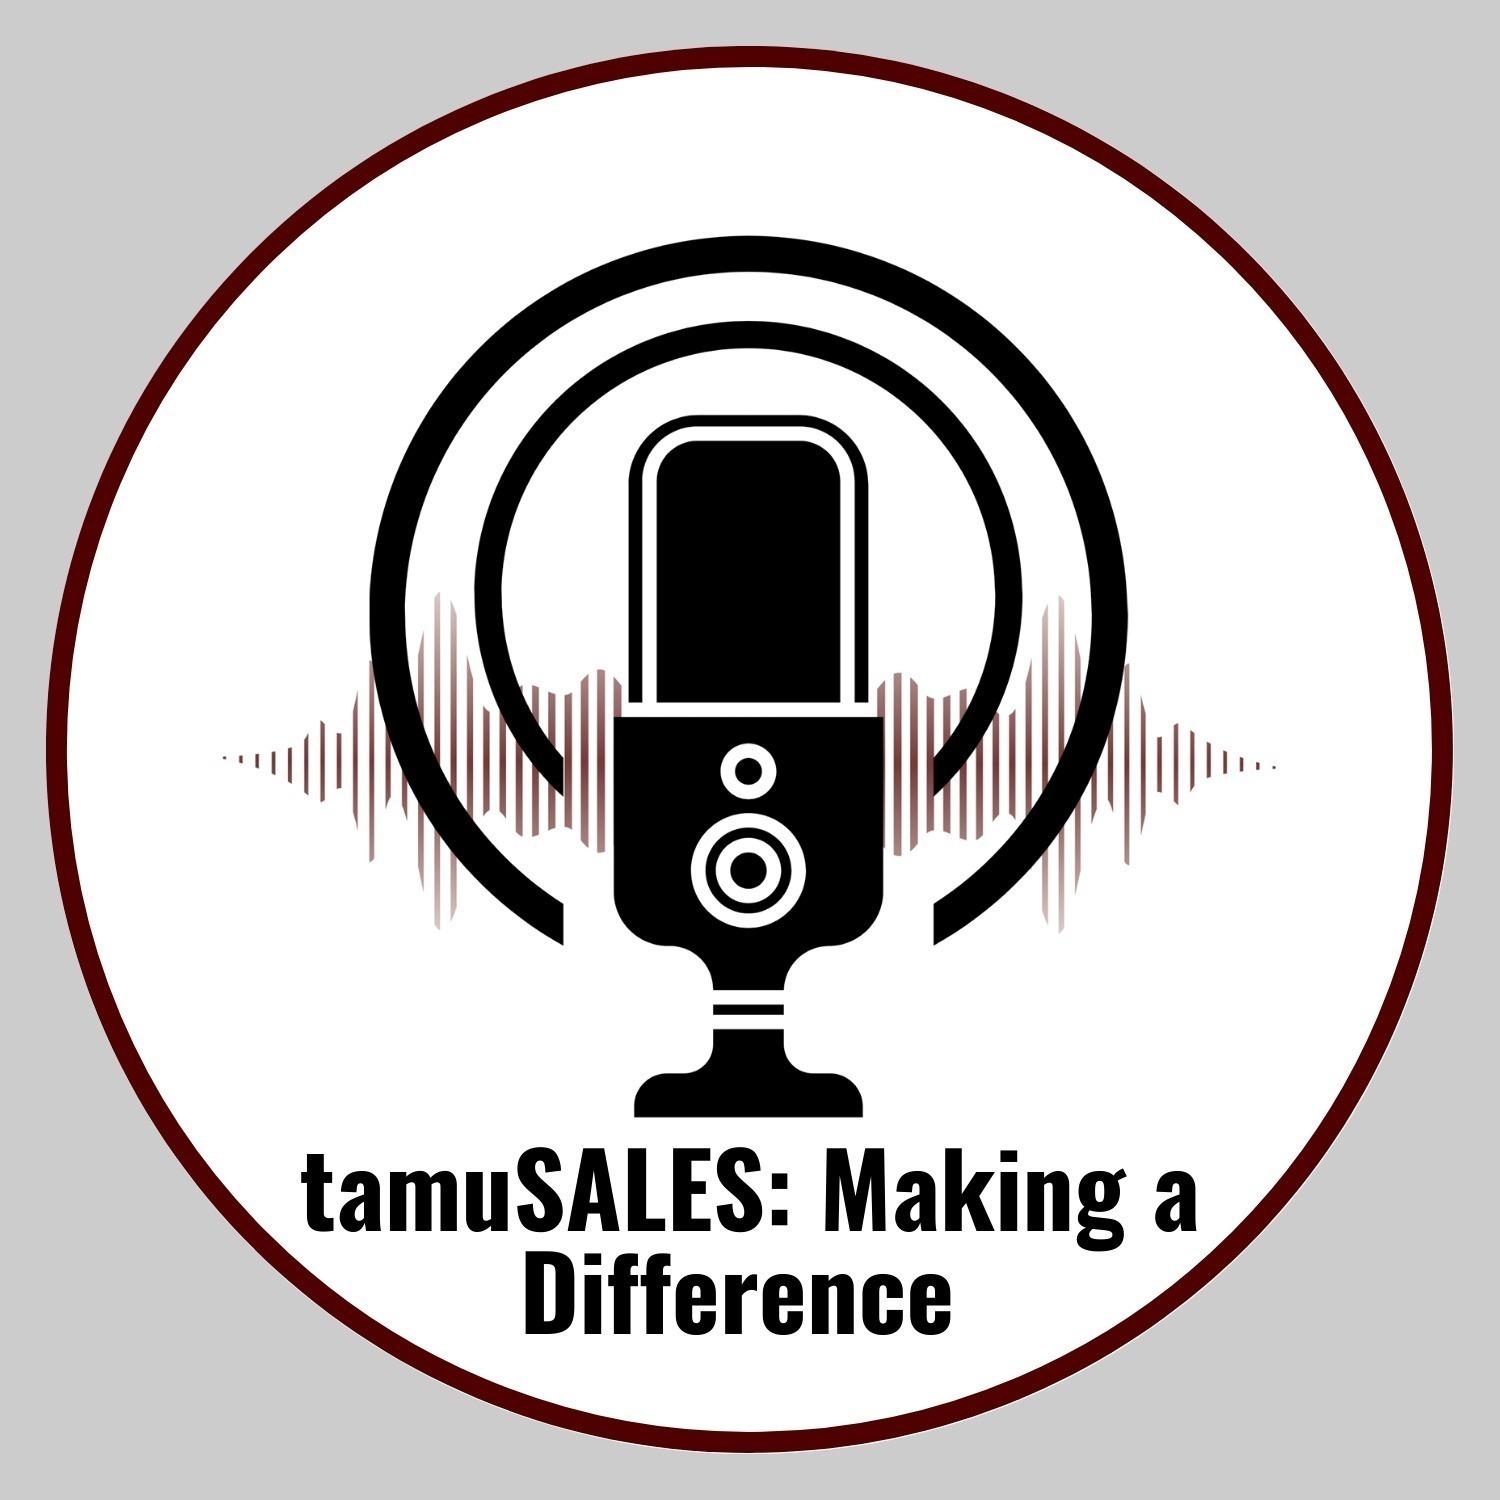 tamuSALES: Making a Difference